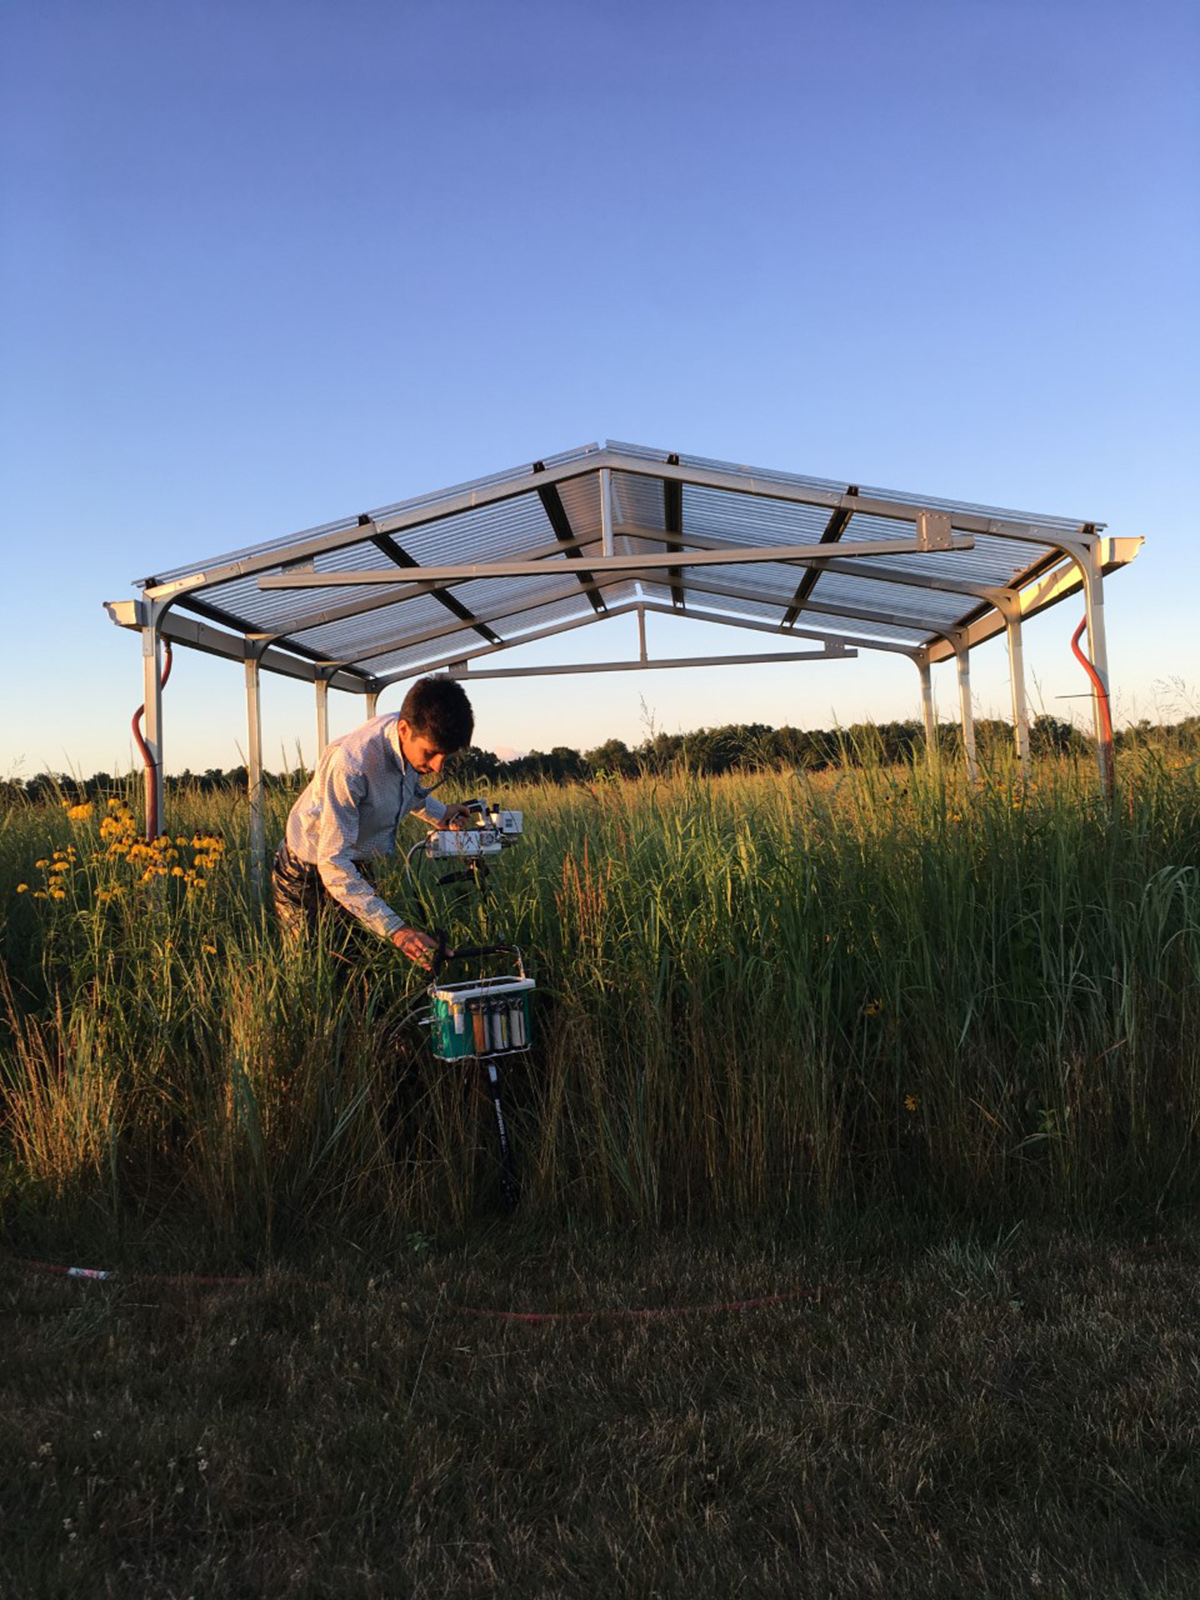 A photo shows golden sun beams illuminating MSU postdoctoral researcher Mauricio Tejera-Nieves standing in a field of switchgrass, its green and yellow blades standing taller than his waist. Behind Tejera-Nieves is a large canopy with a metal frame and a translucent top to block rain from hitting the grass underneath.